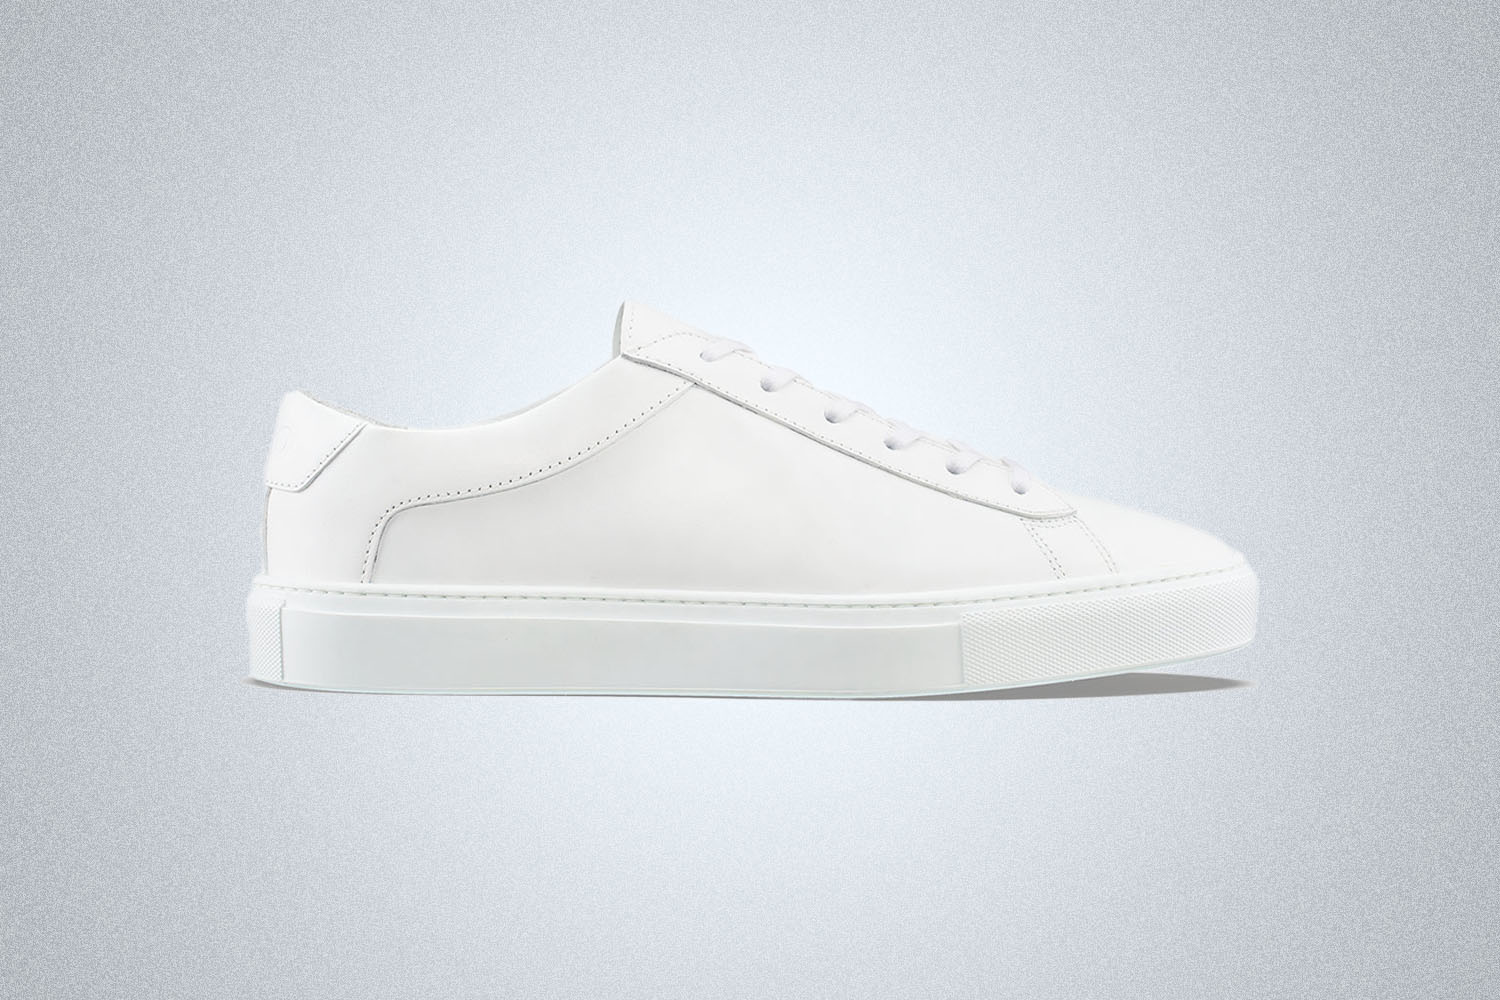 a pair of white sneakers on a grey background